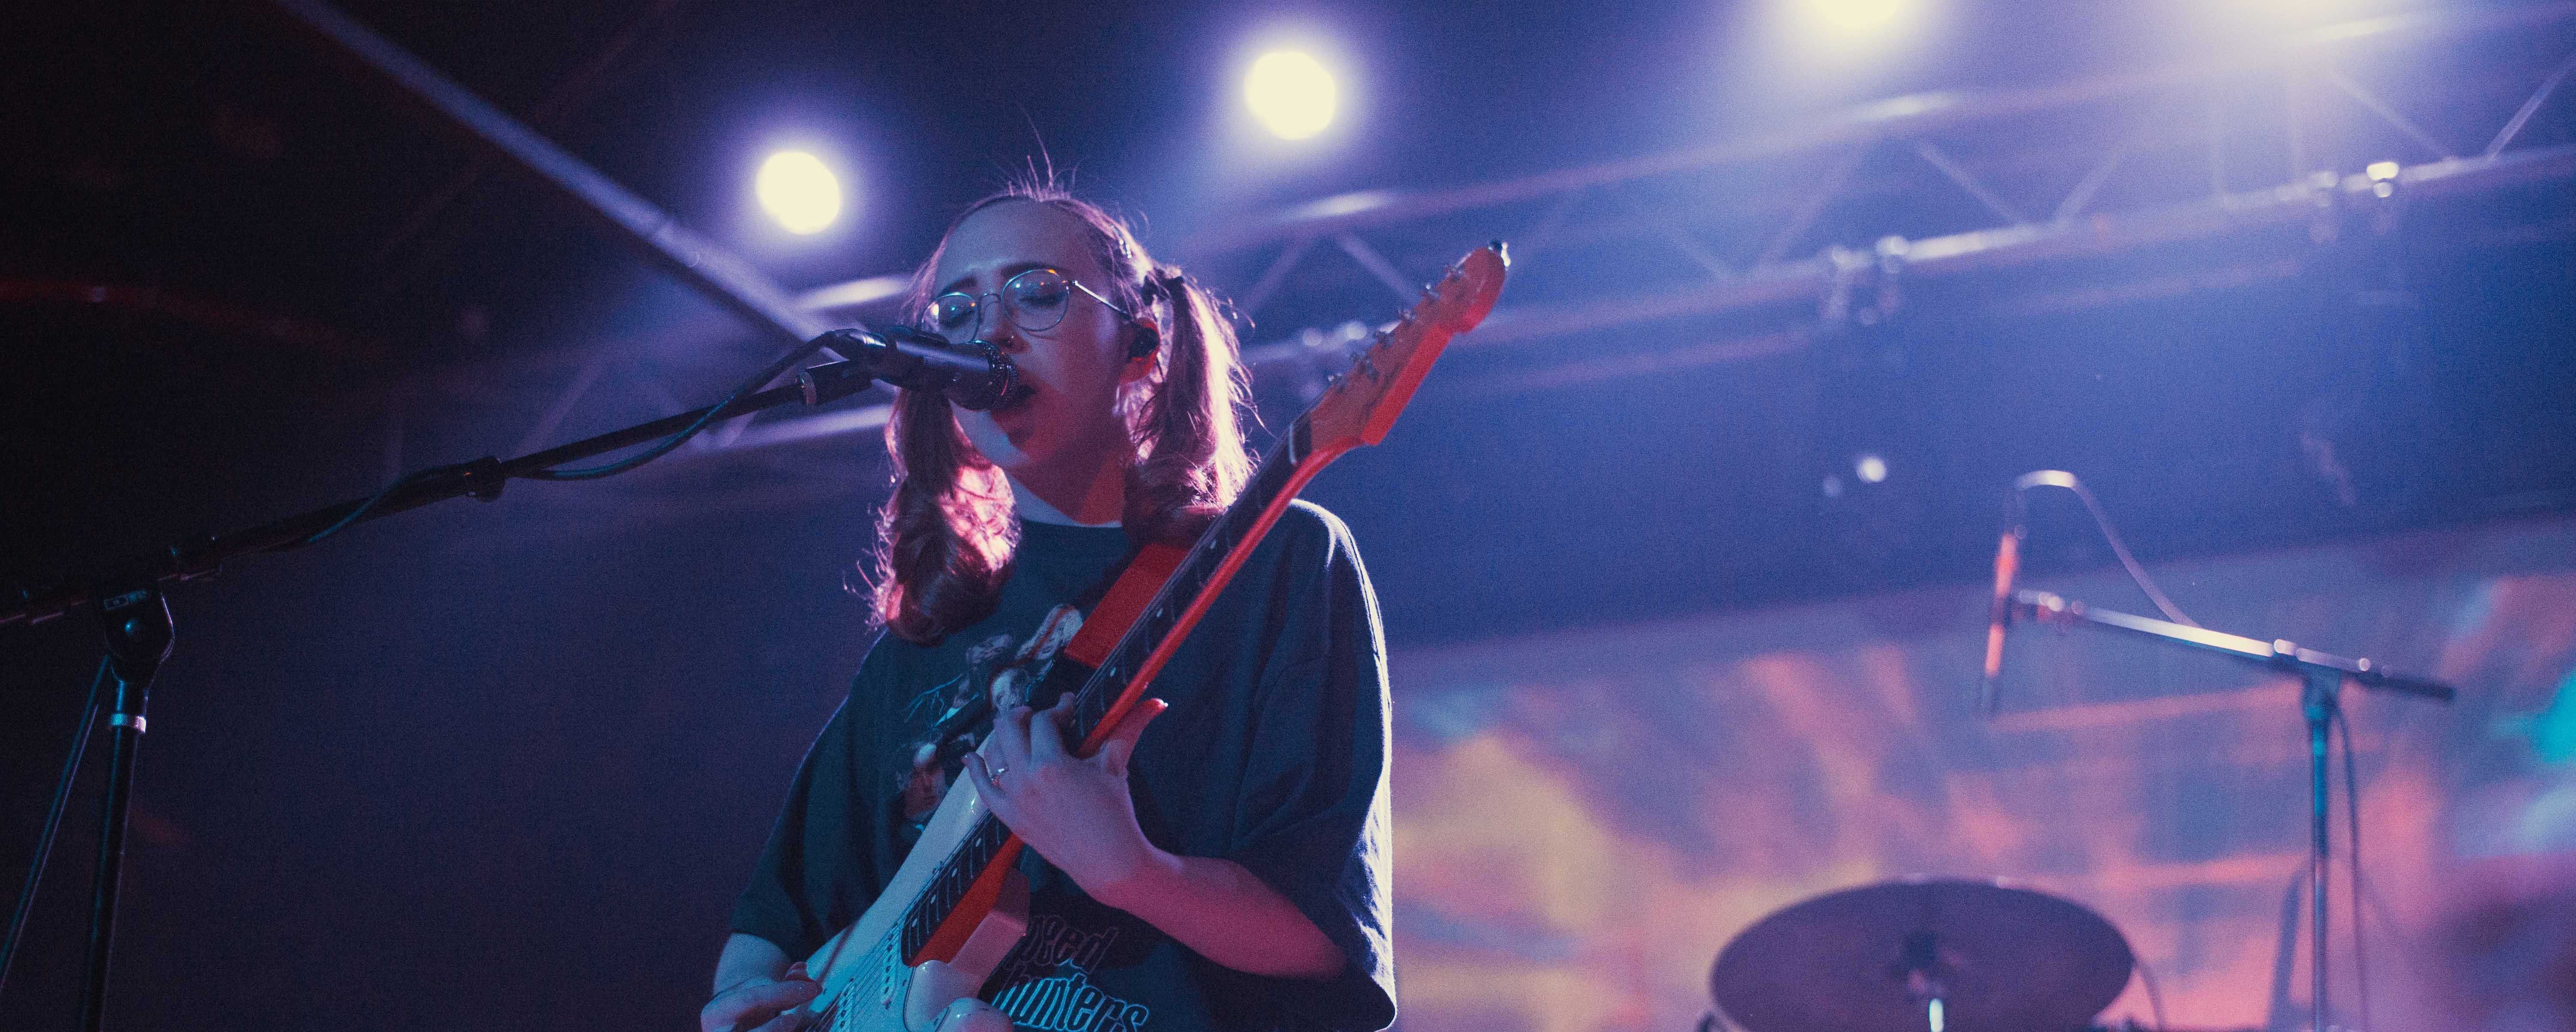 Soccer Mommy embraces vulnerabilities in electrifying set at Brighton Music Hall